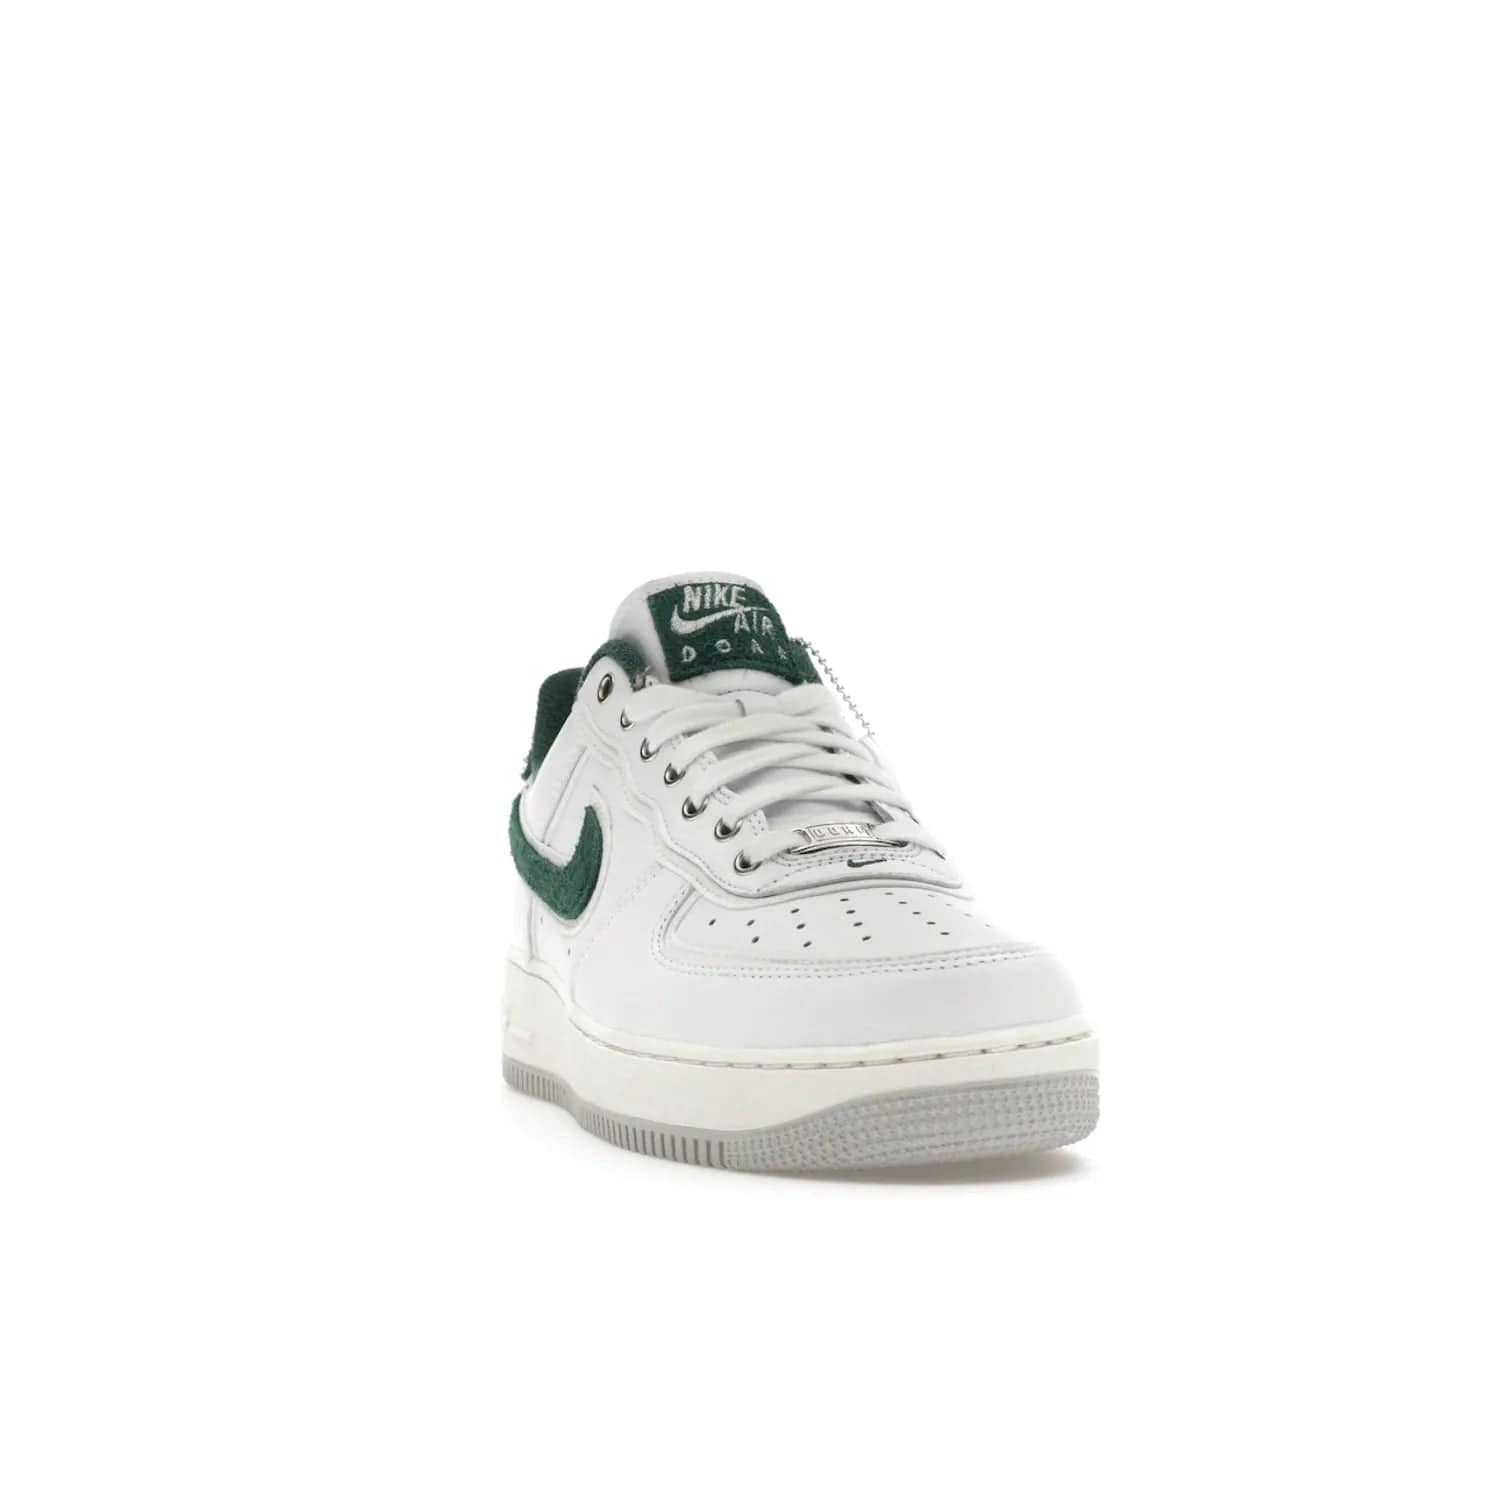 Nike Air Force 1 Low '07 Premium University of Oregon PE - Image 8 - Only at www.BallersClubKickz.com - The Nike Air Force 1 Low '07 Premium. Special Oregon University colorway. White base with green and sail accents. Cushioned rubber midsole. Comfort and style. Support your school!